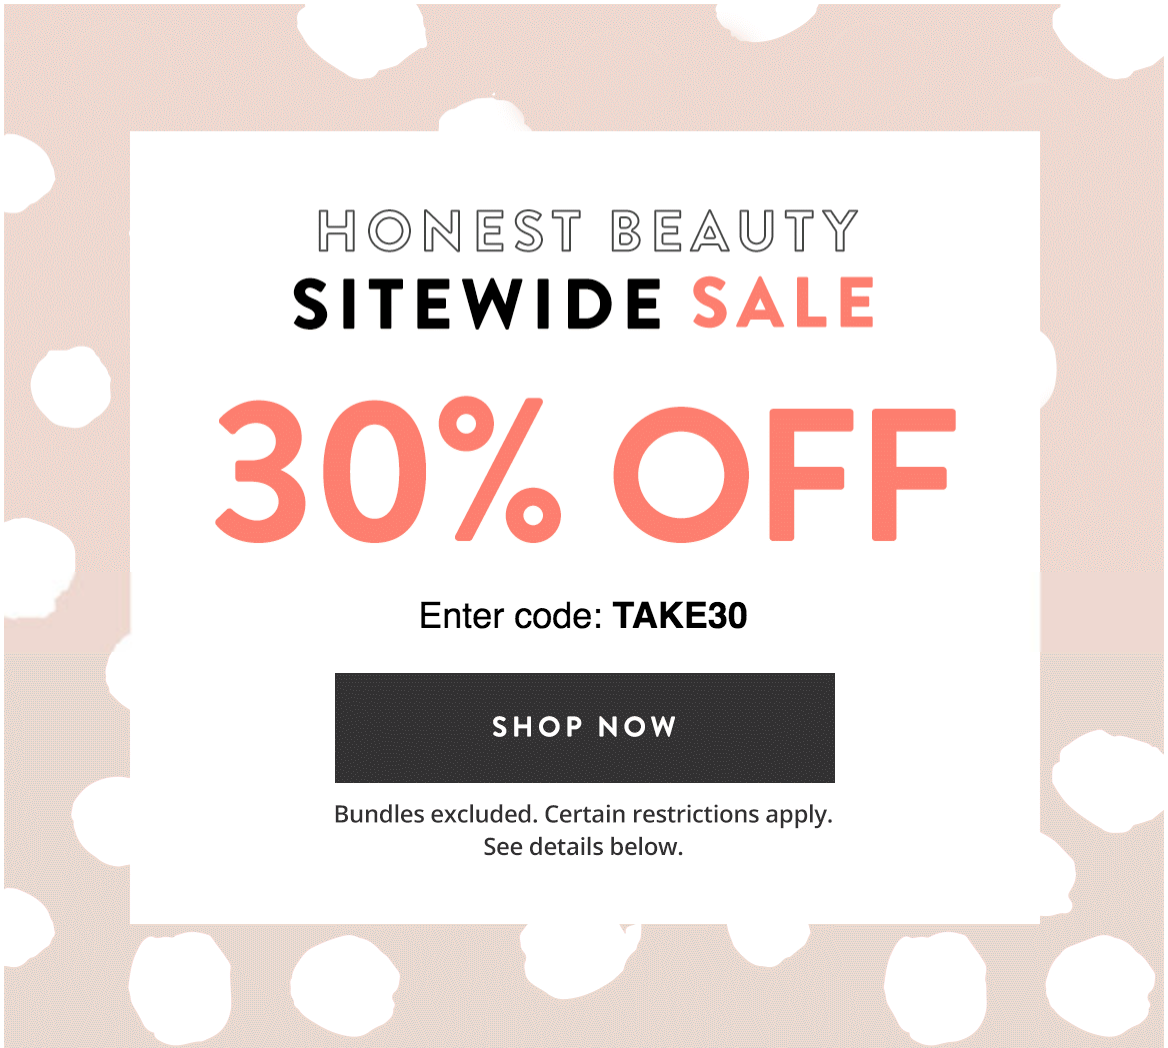 Honest Beauty Coupon – 30% Off Sitewide!